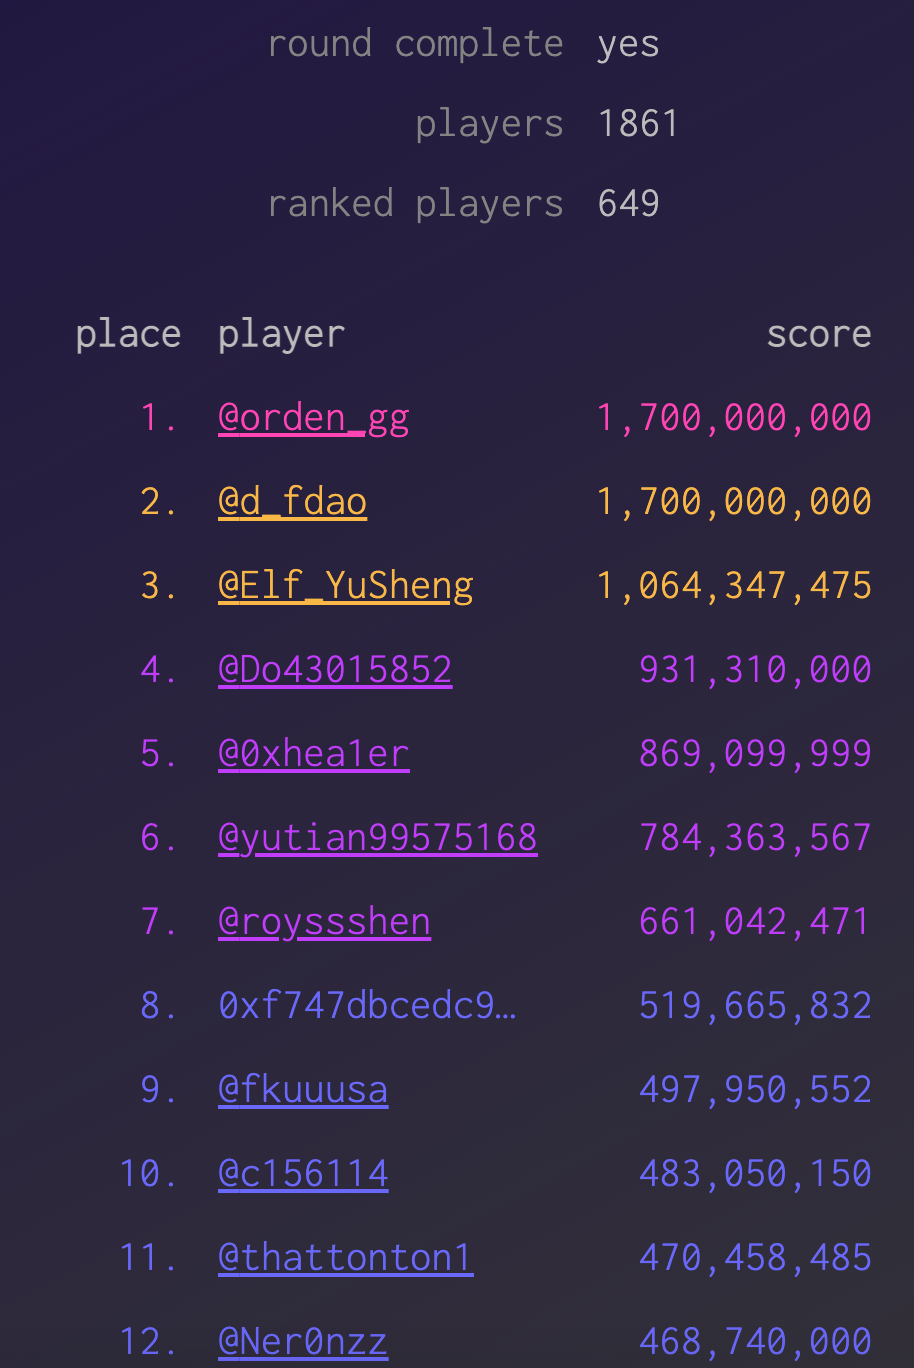 A view of the Dark Forest leaderboard from the last public round, via https://zkga.me/